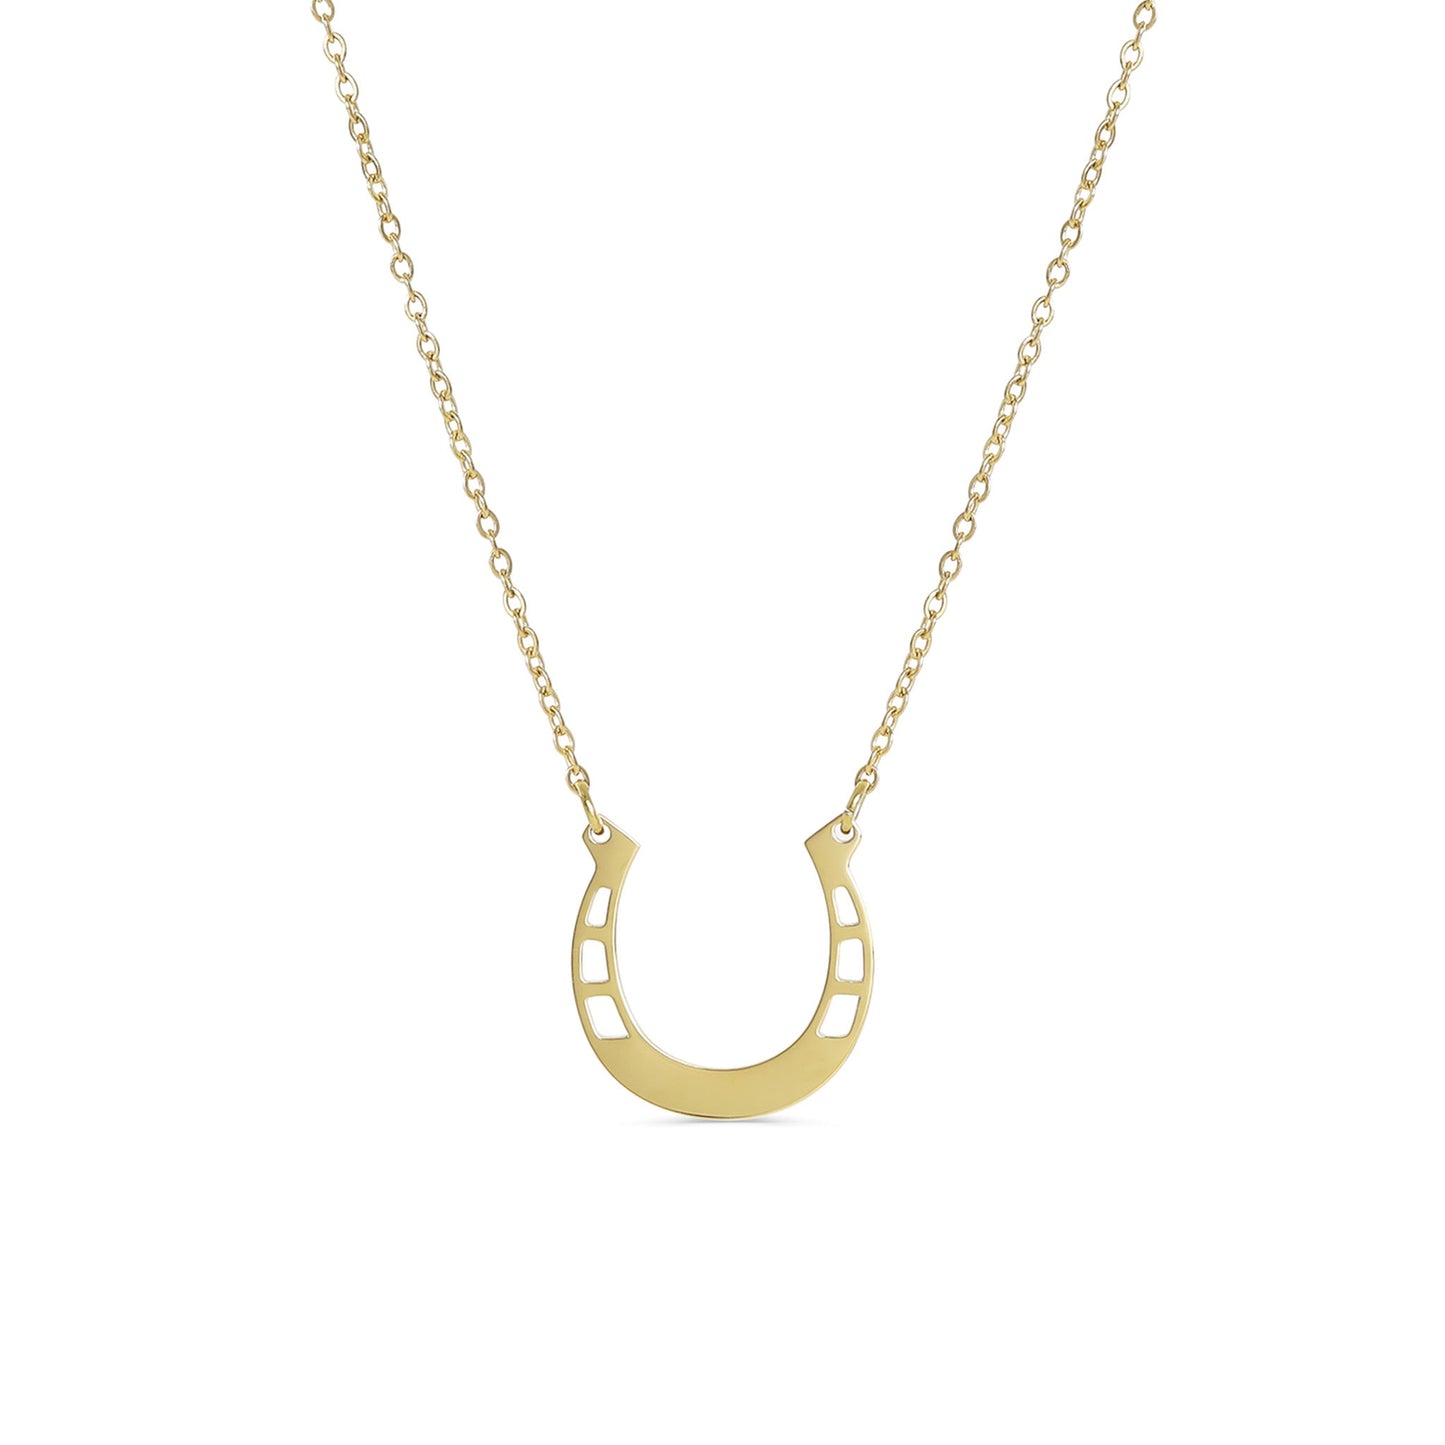 18 Engravable Stainless Steel Horseshoe Necklace / SBB0333